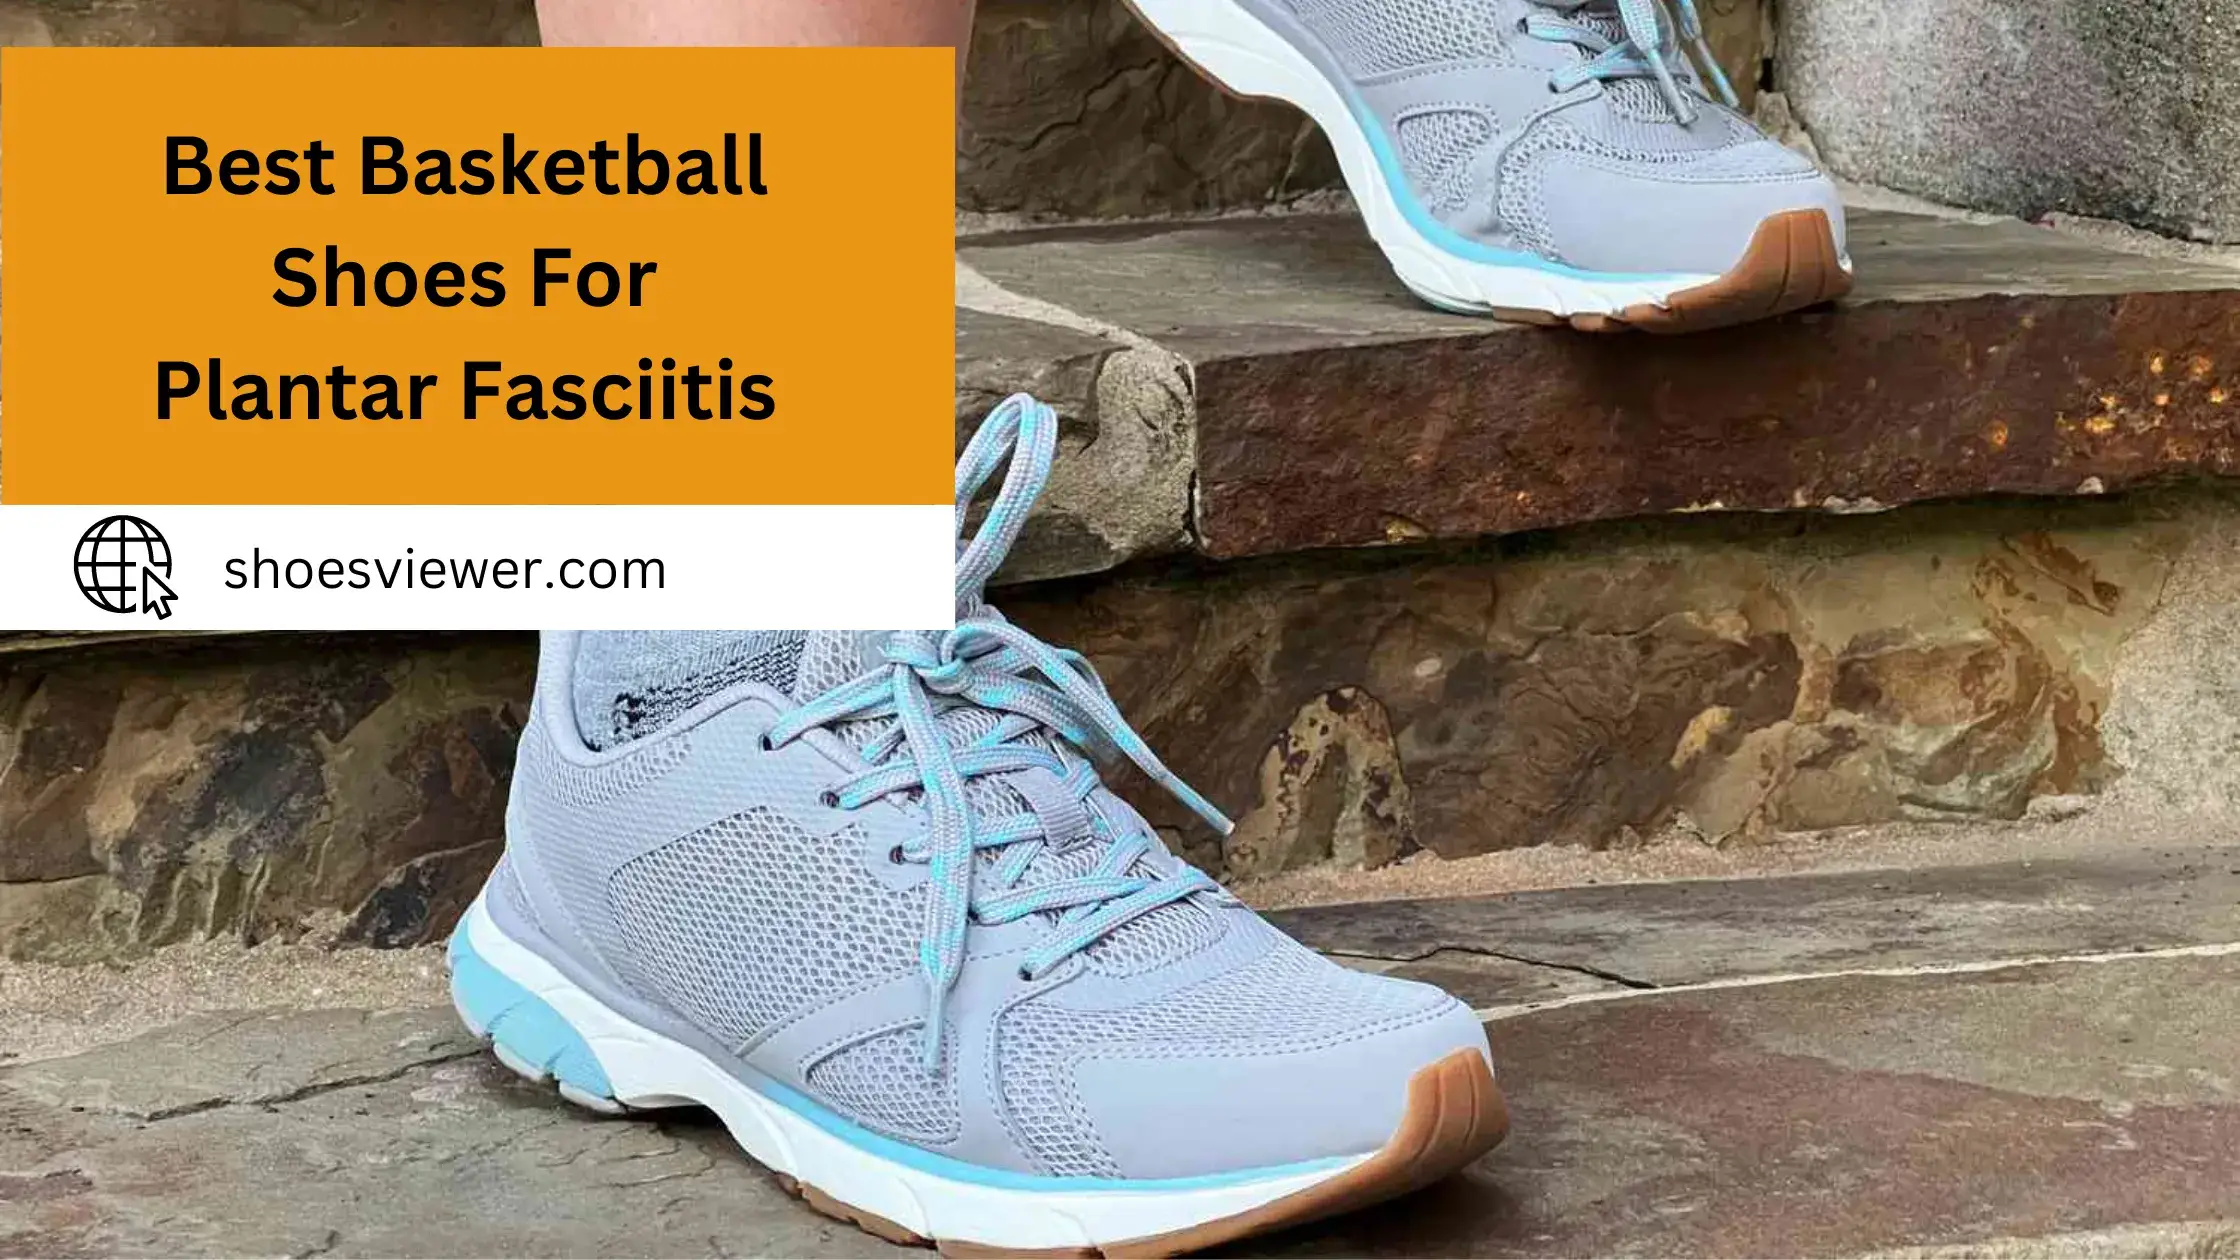 Best Basketball Shoes For Plantar Fasciitis - (An In-Depth Guide)